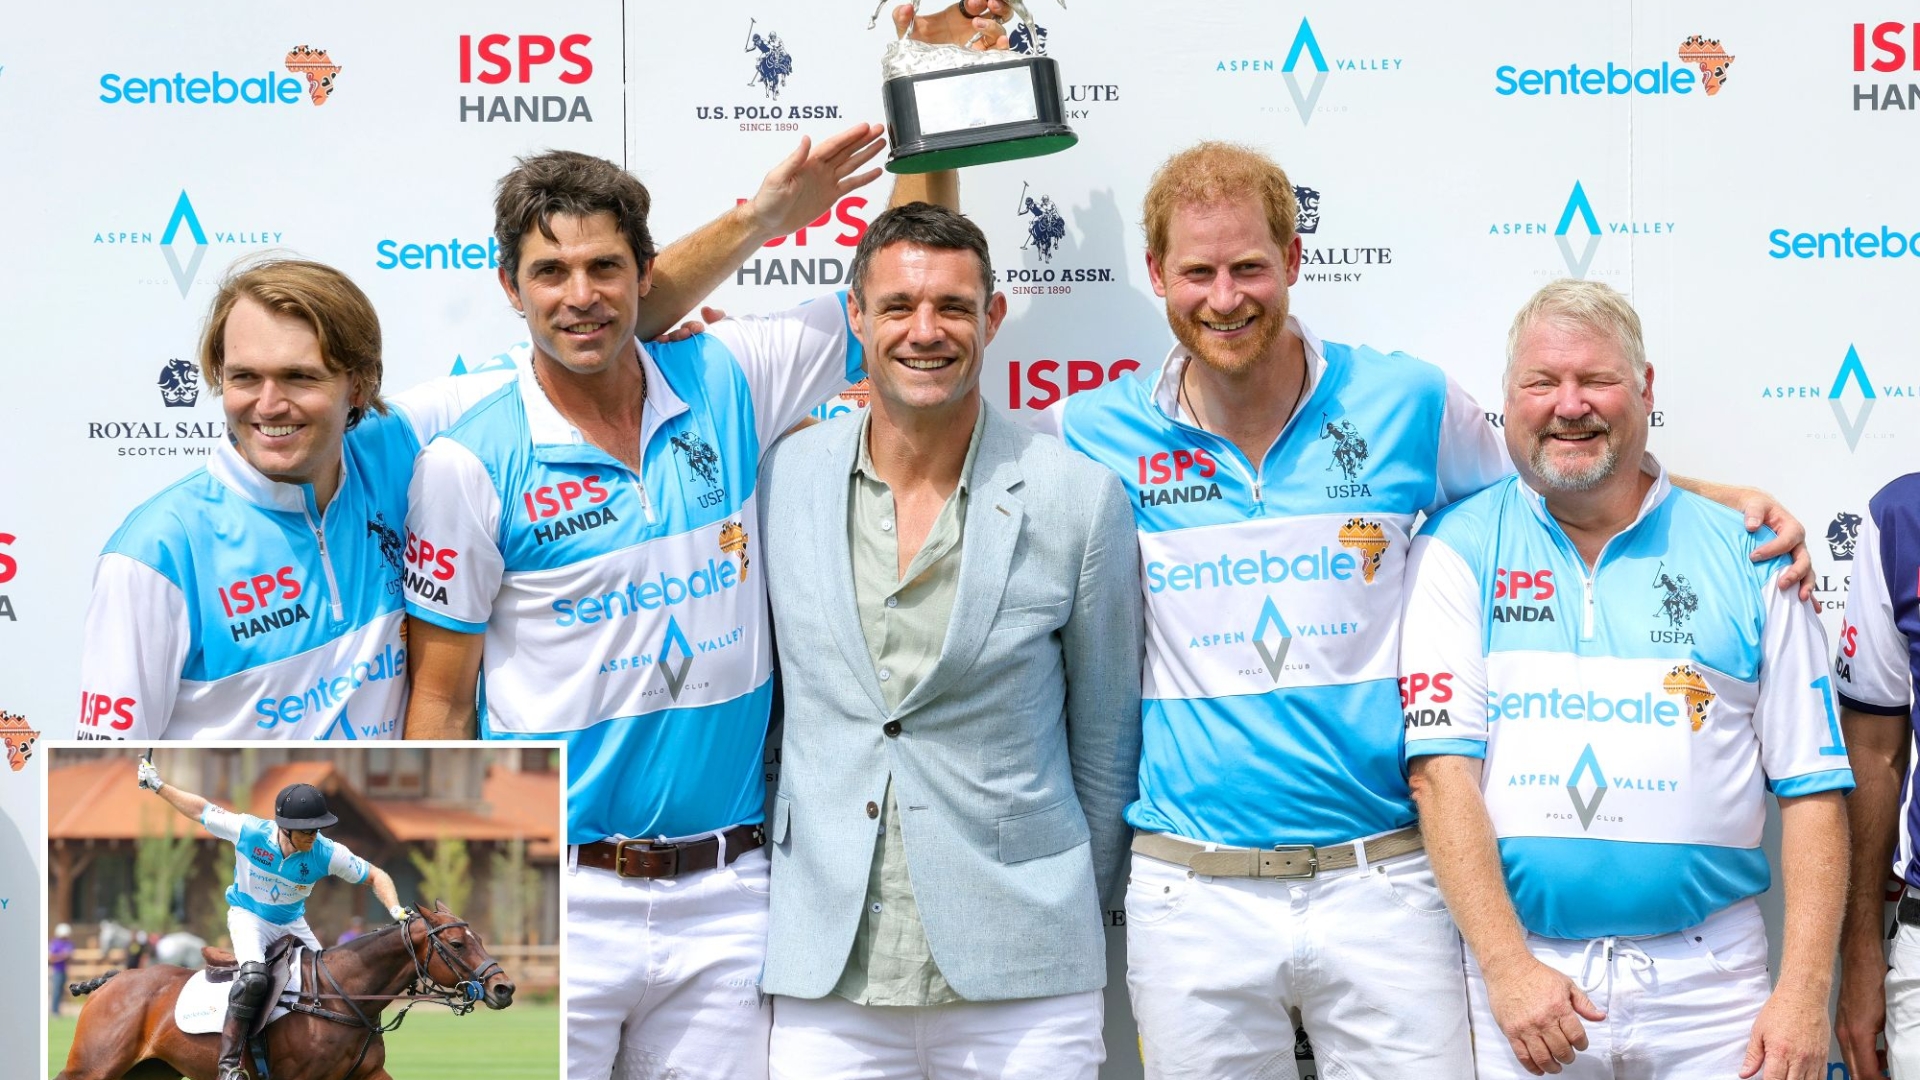 After winning the polo title together with his team at a charity tournament, Jubilant Prince Harry takes home the trophy